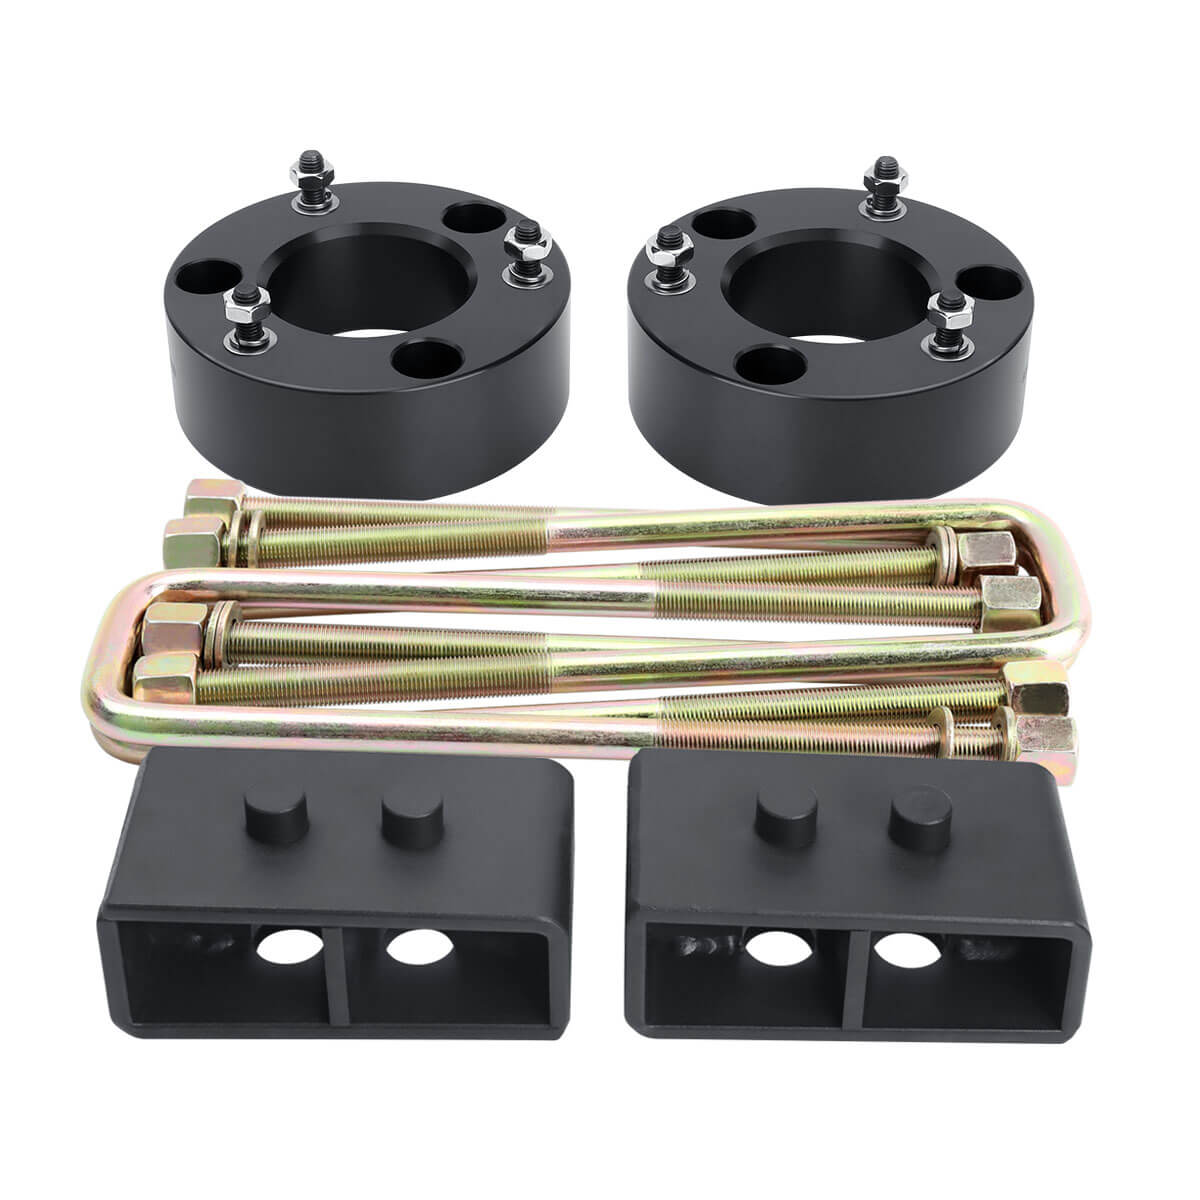 3" Front and 2" Rear Leveling lift kit for 2004-2019 F150 Ford Expedition xccscss.